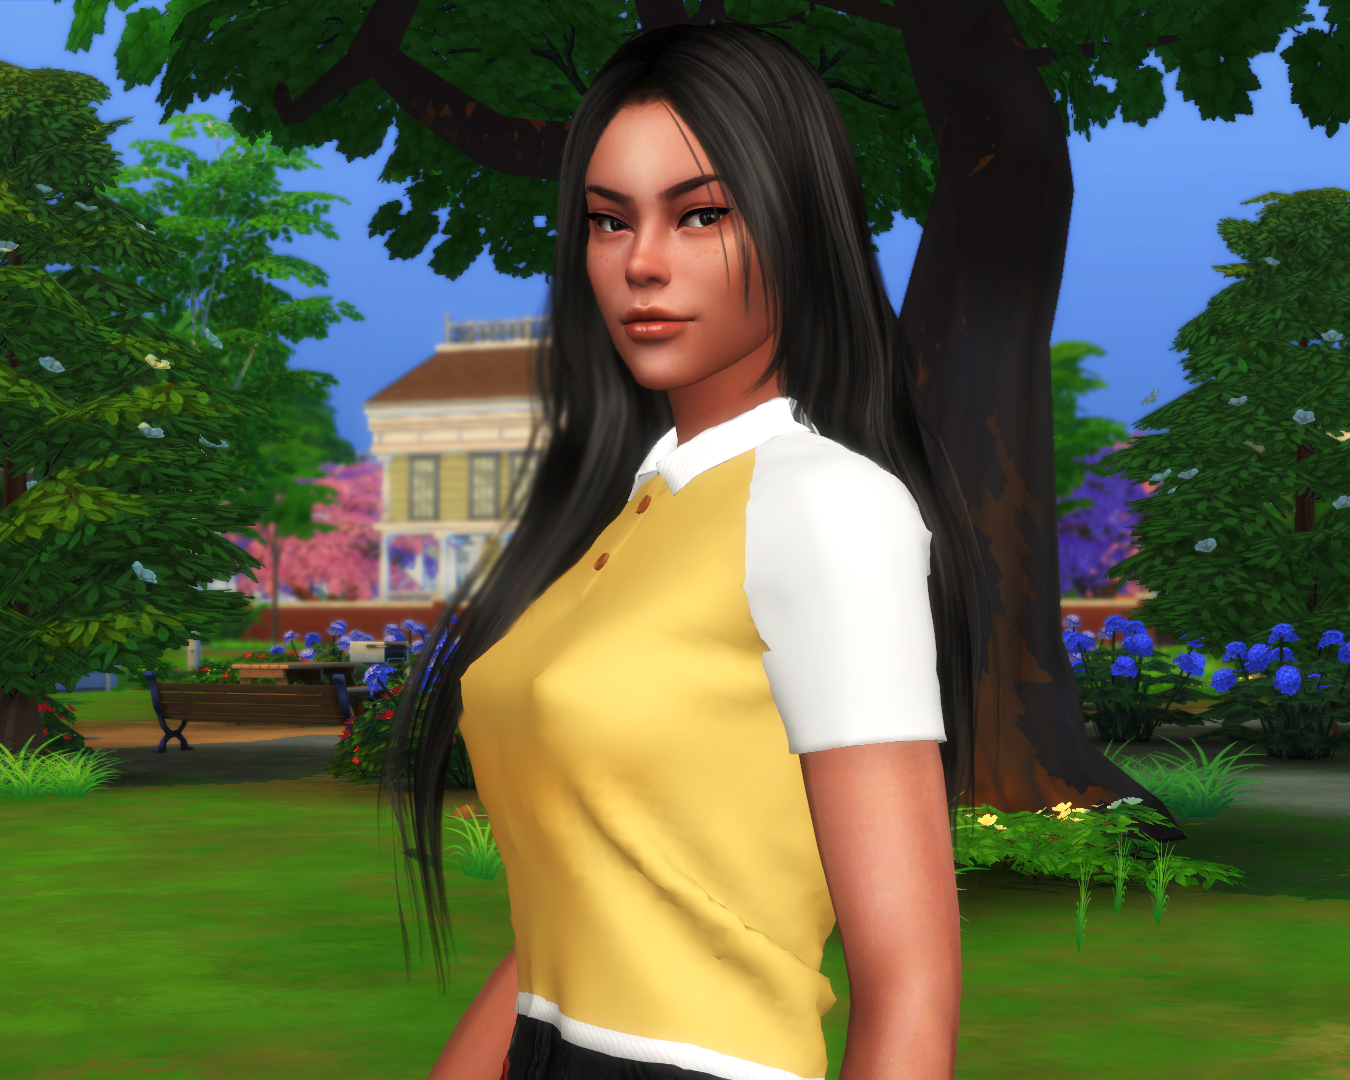 Share Your Female Sims! - Page 183 - The Sims 4 General Discussion ...